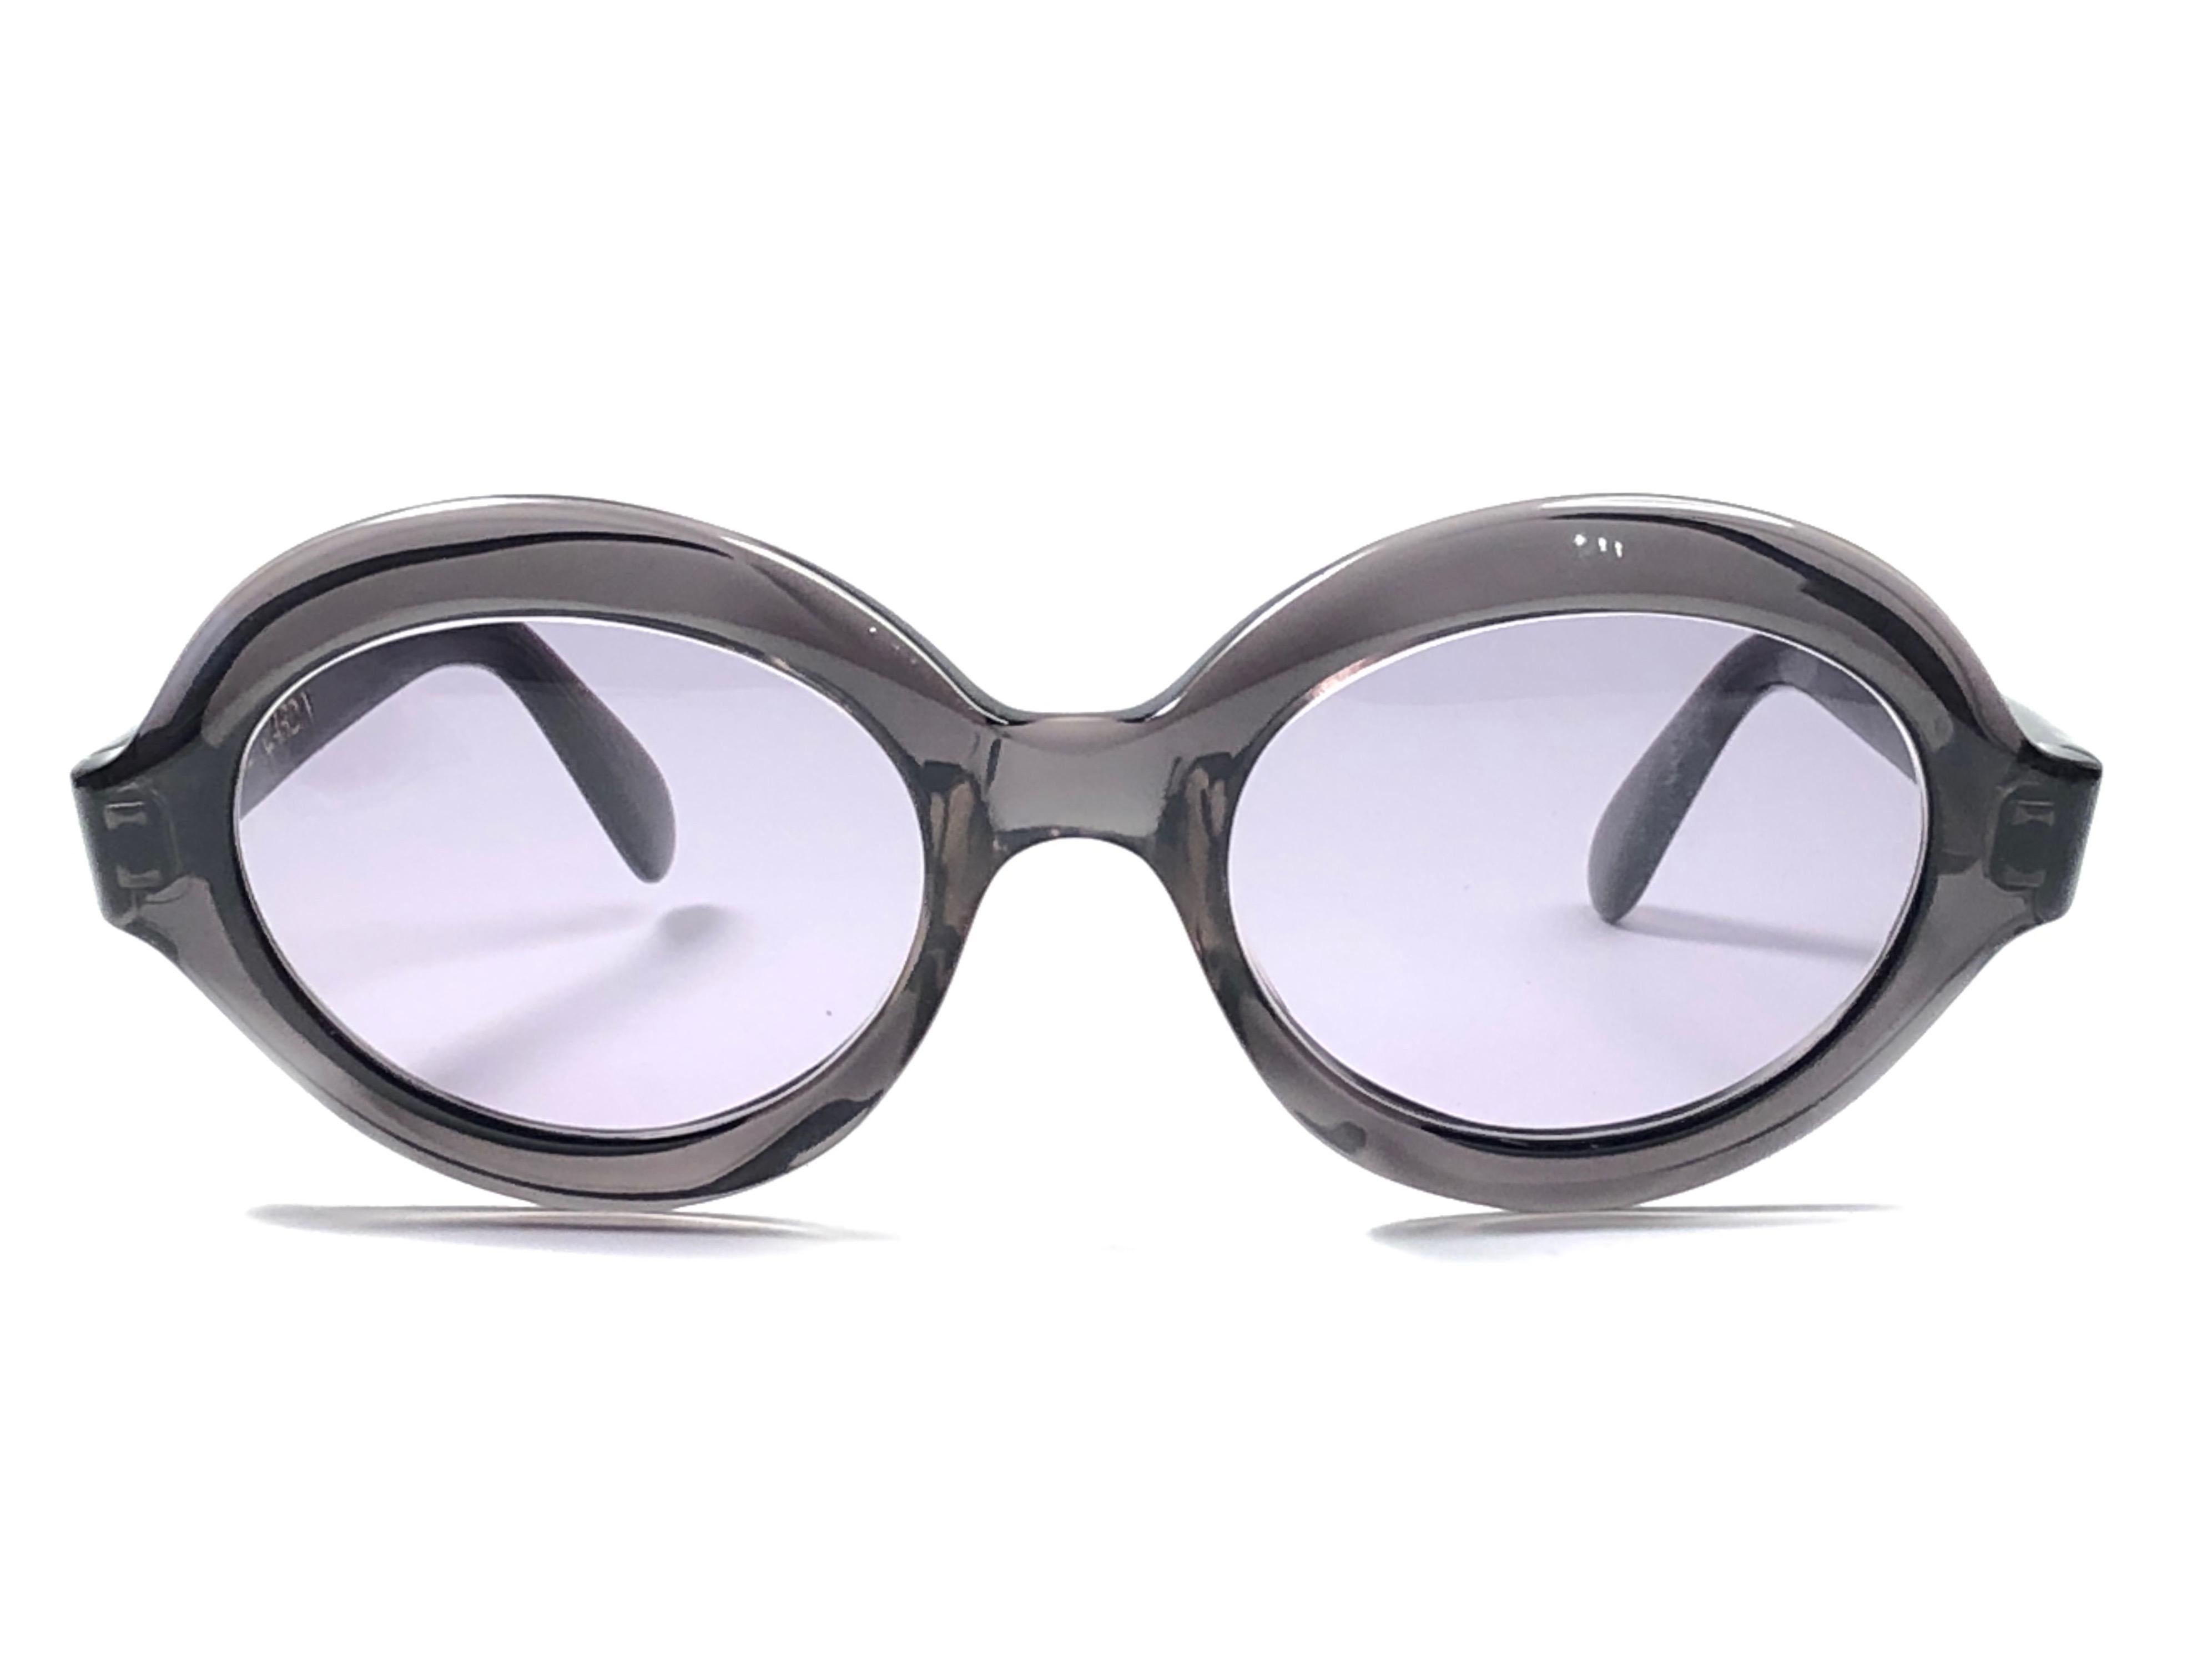 Vintage New Pierre Cardin medium round translucent charcoal frame with grey lenses. 

New, never used or displayed this pair of vintage Pierre Cardin is a rare and sought after piece not to miss out!